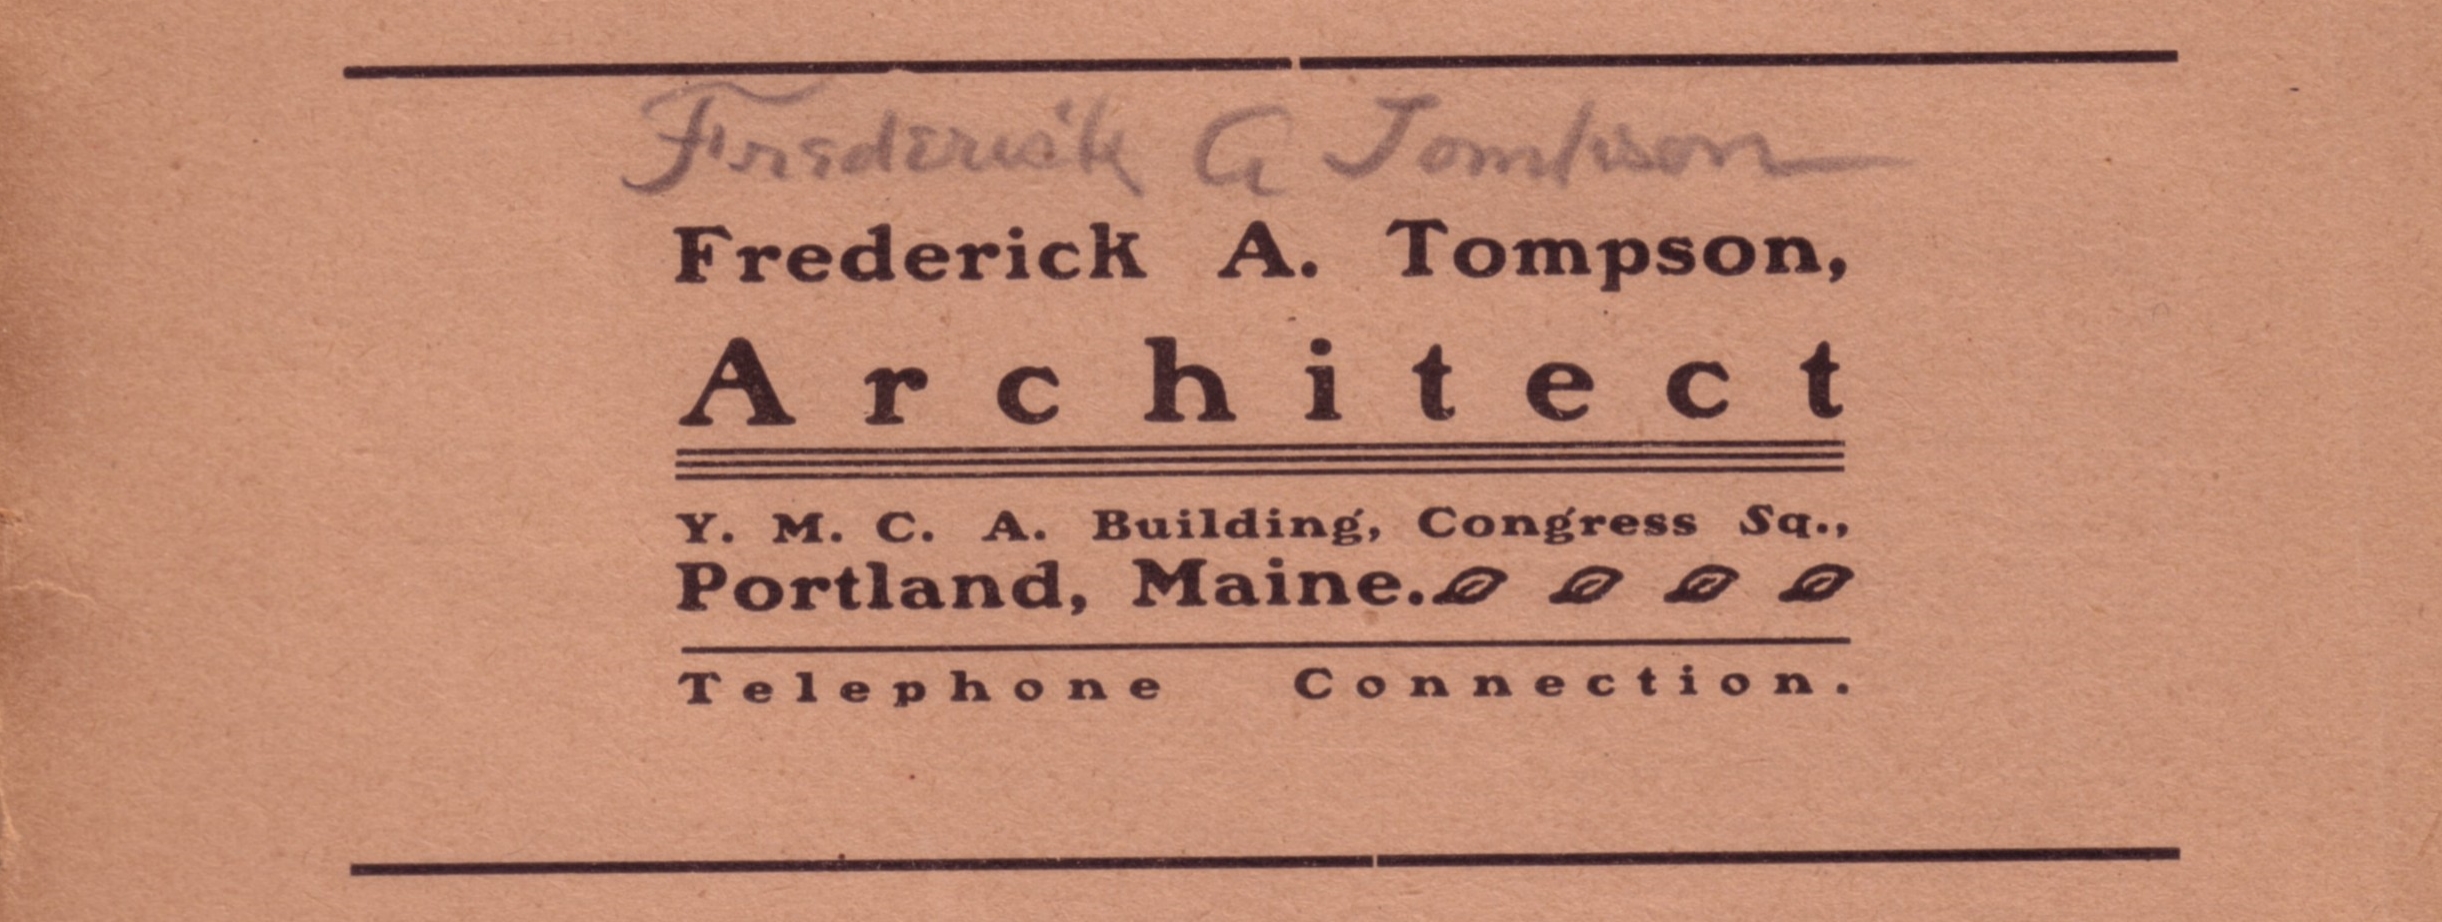 stevens and tompson signatures 1901 city directory - not real.jpg